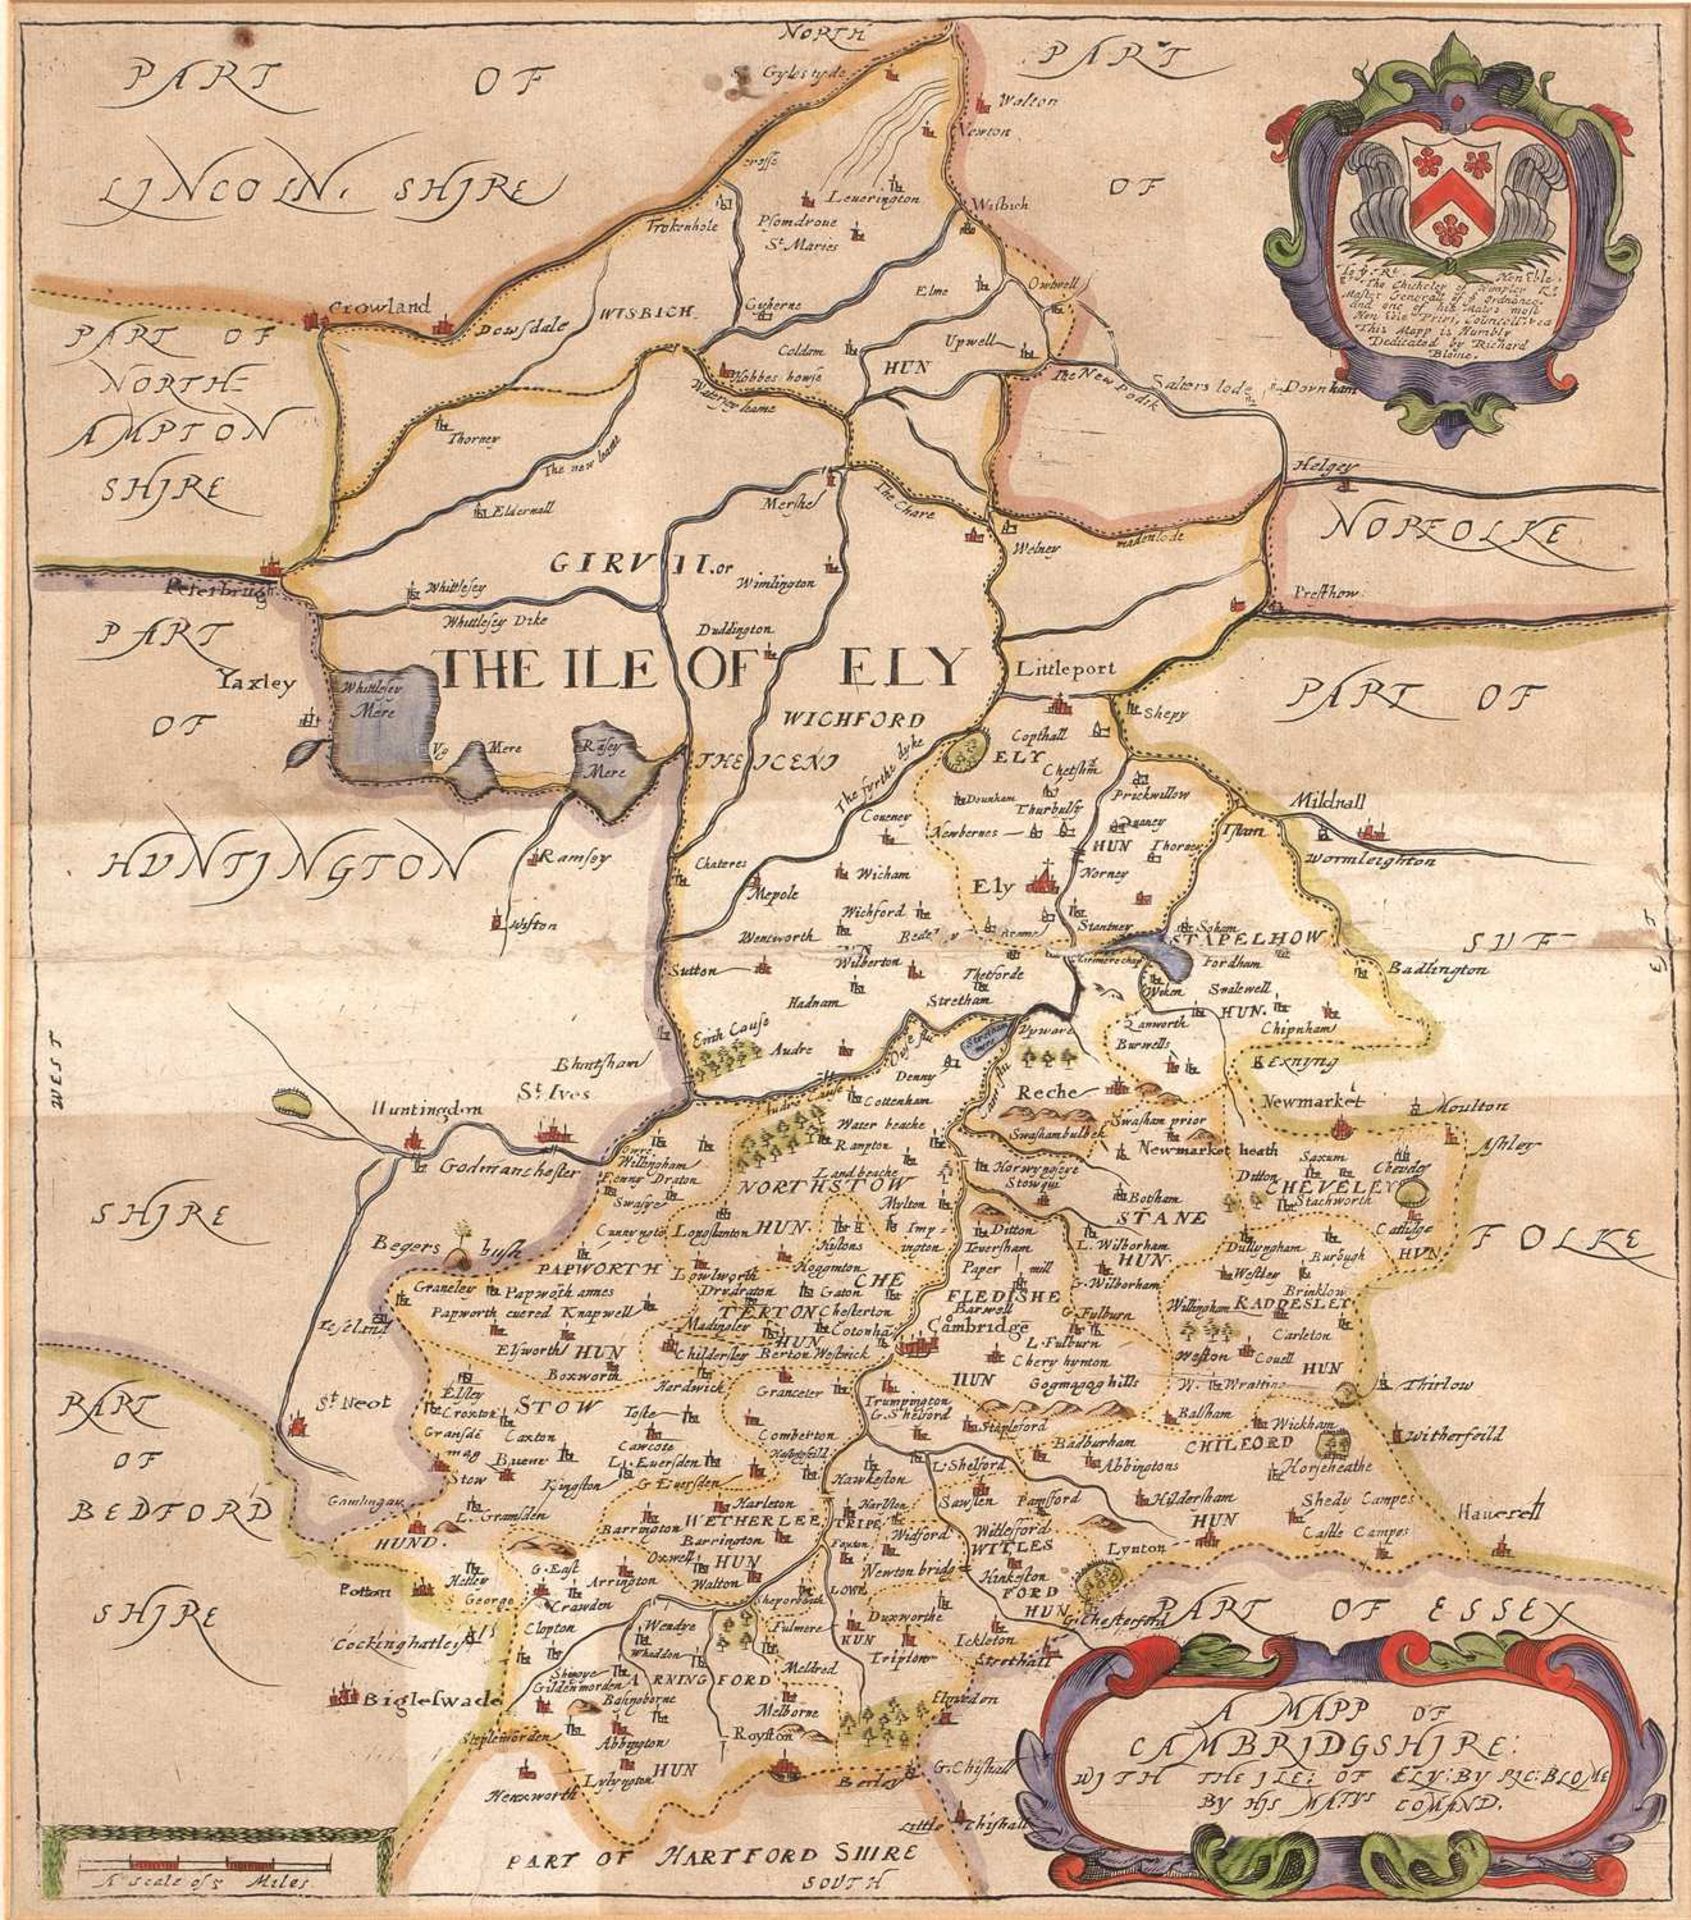 Coloured map of Cambridgeshire Speede (John) described with the devision (sic) of the Hundreds,